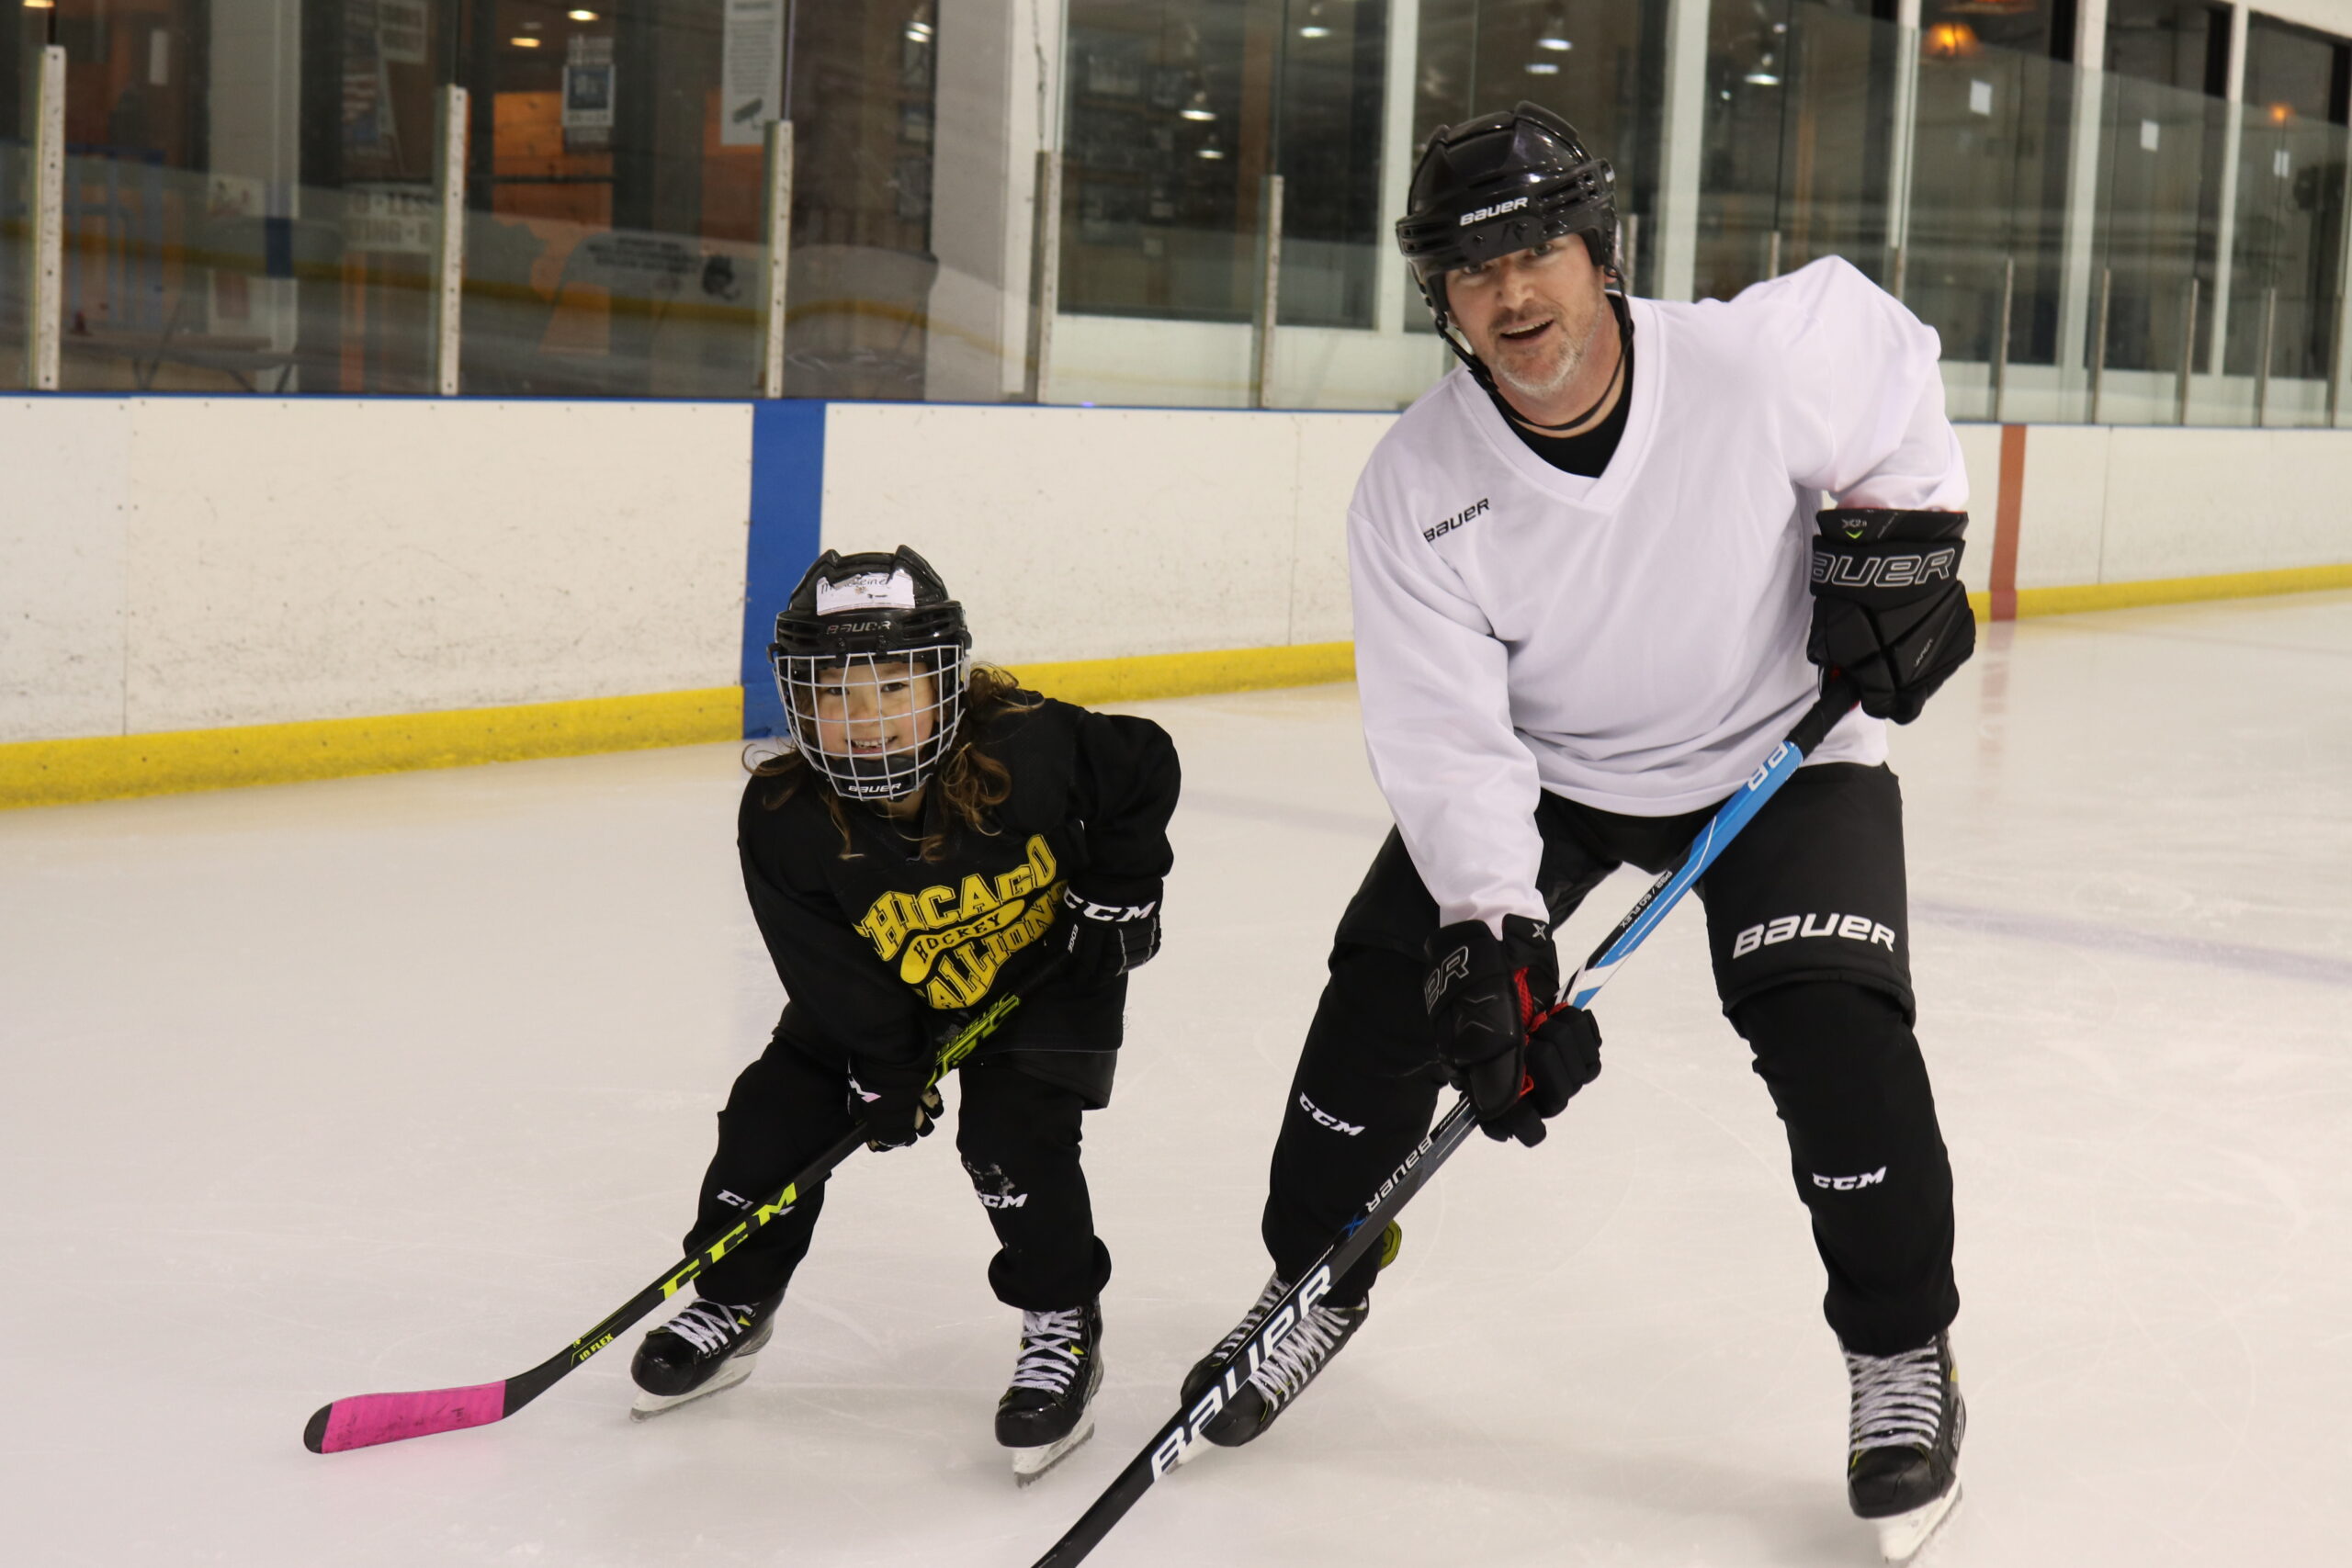 Stick and Puck- the perfect time for hockey training and fun!